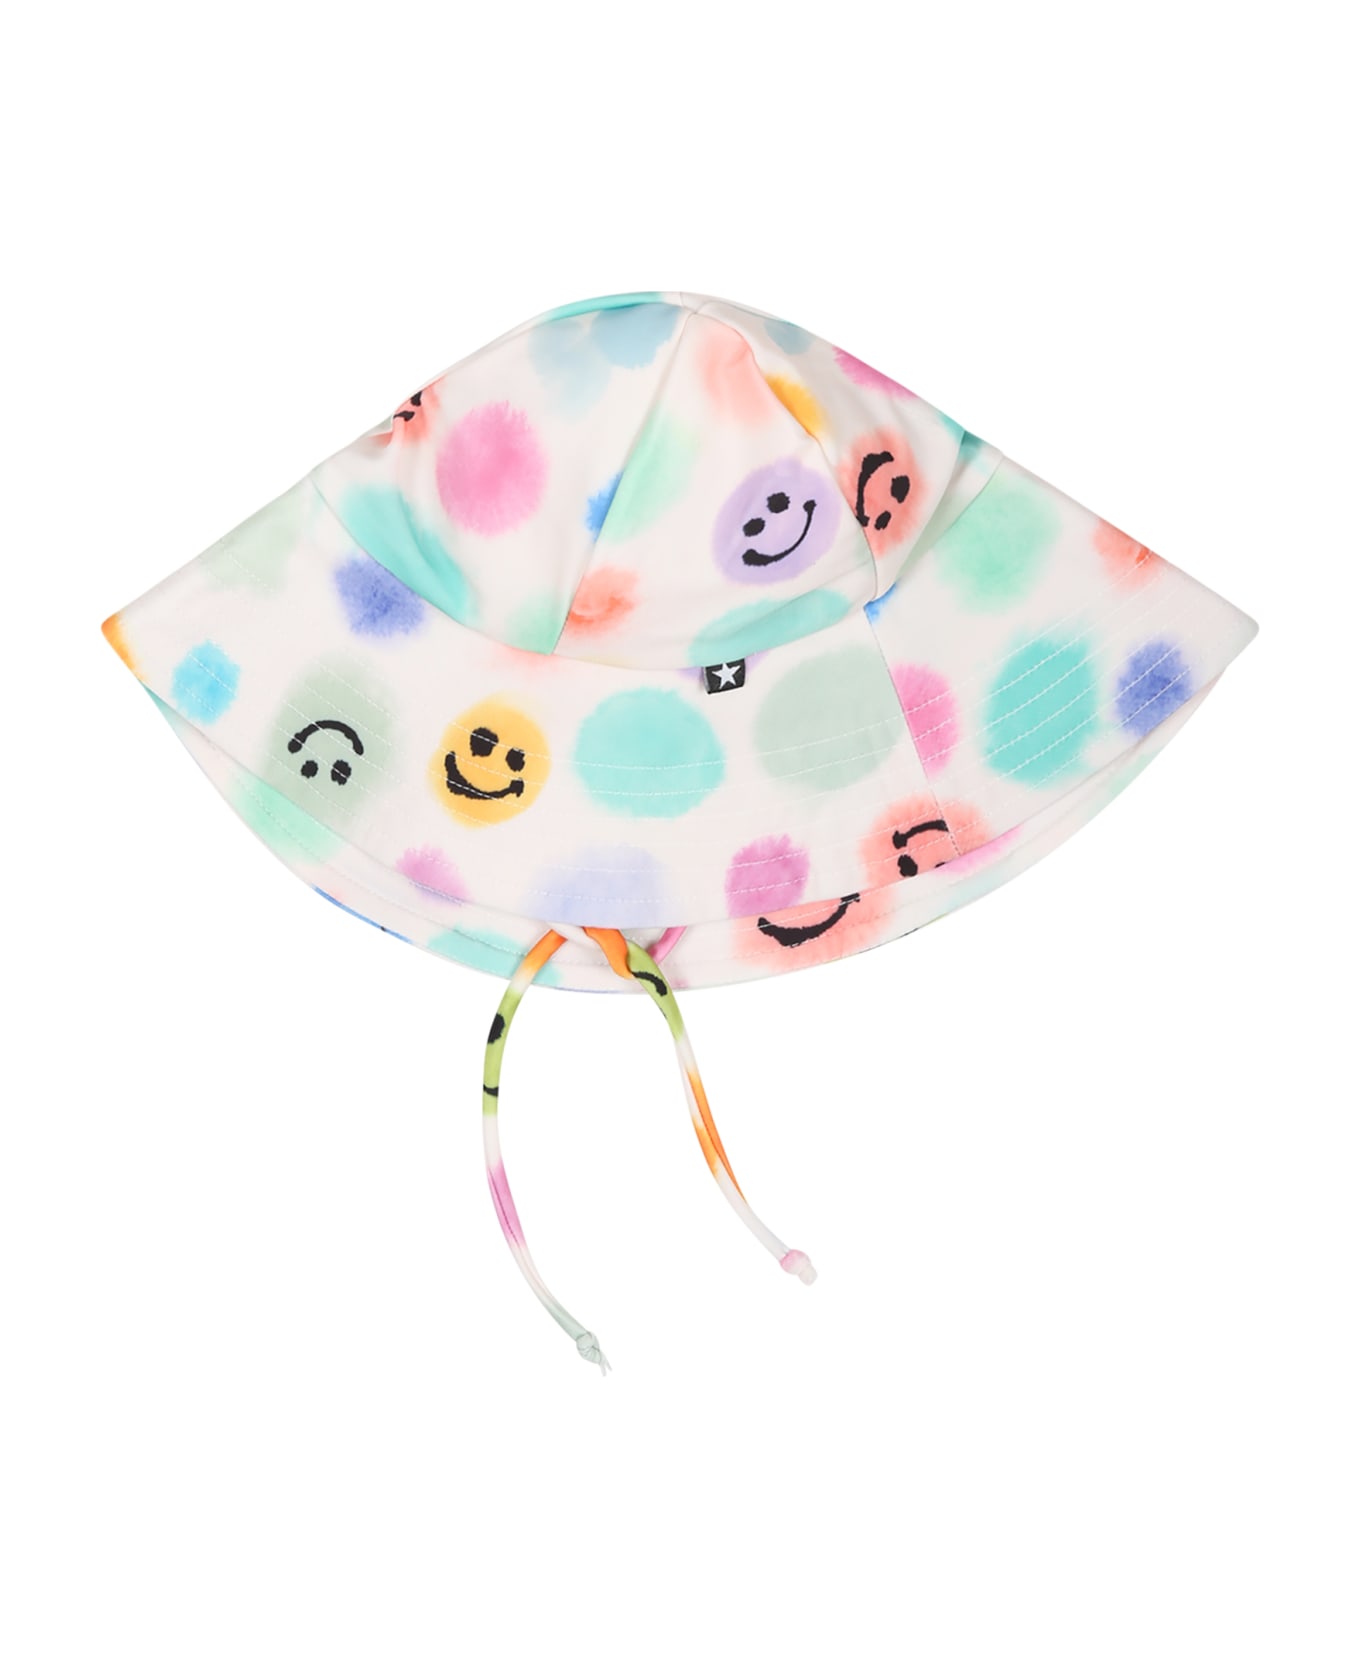 Molo White Cloche For Babykids With Smiley - Multicolor アクセサリー＆ギフト